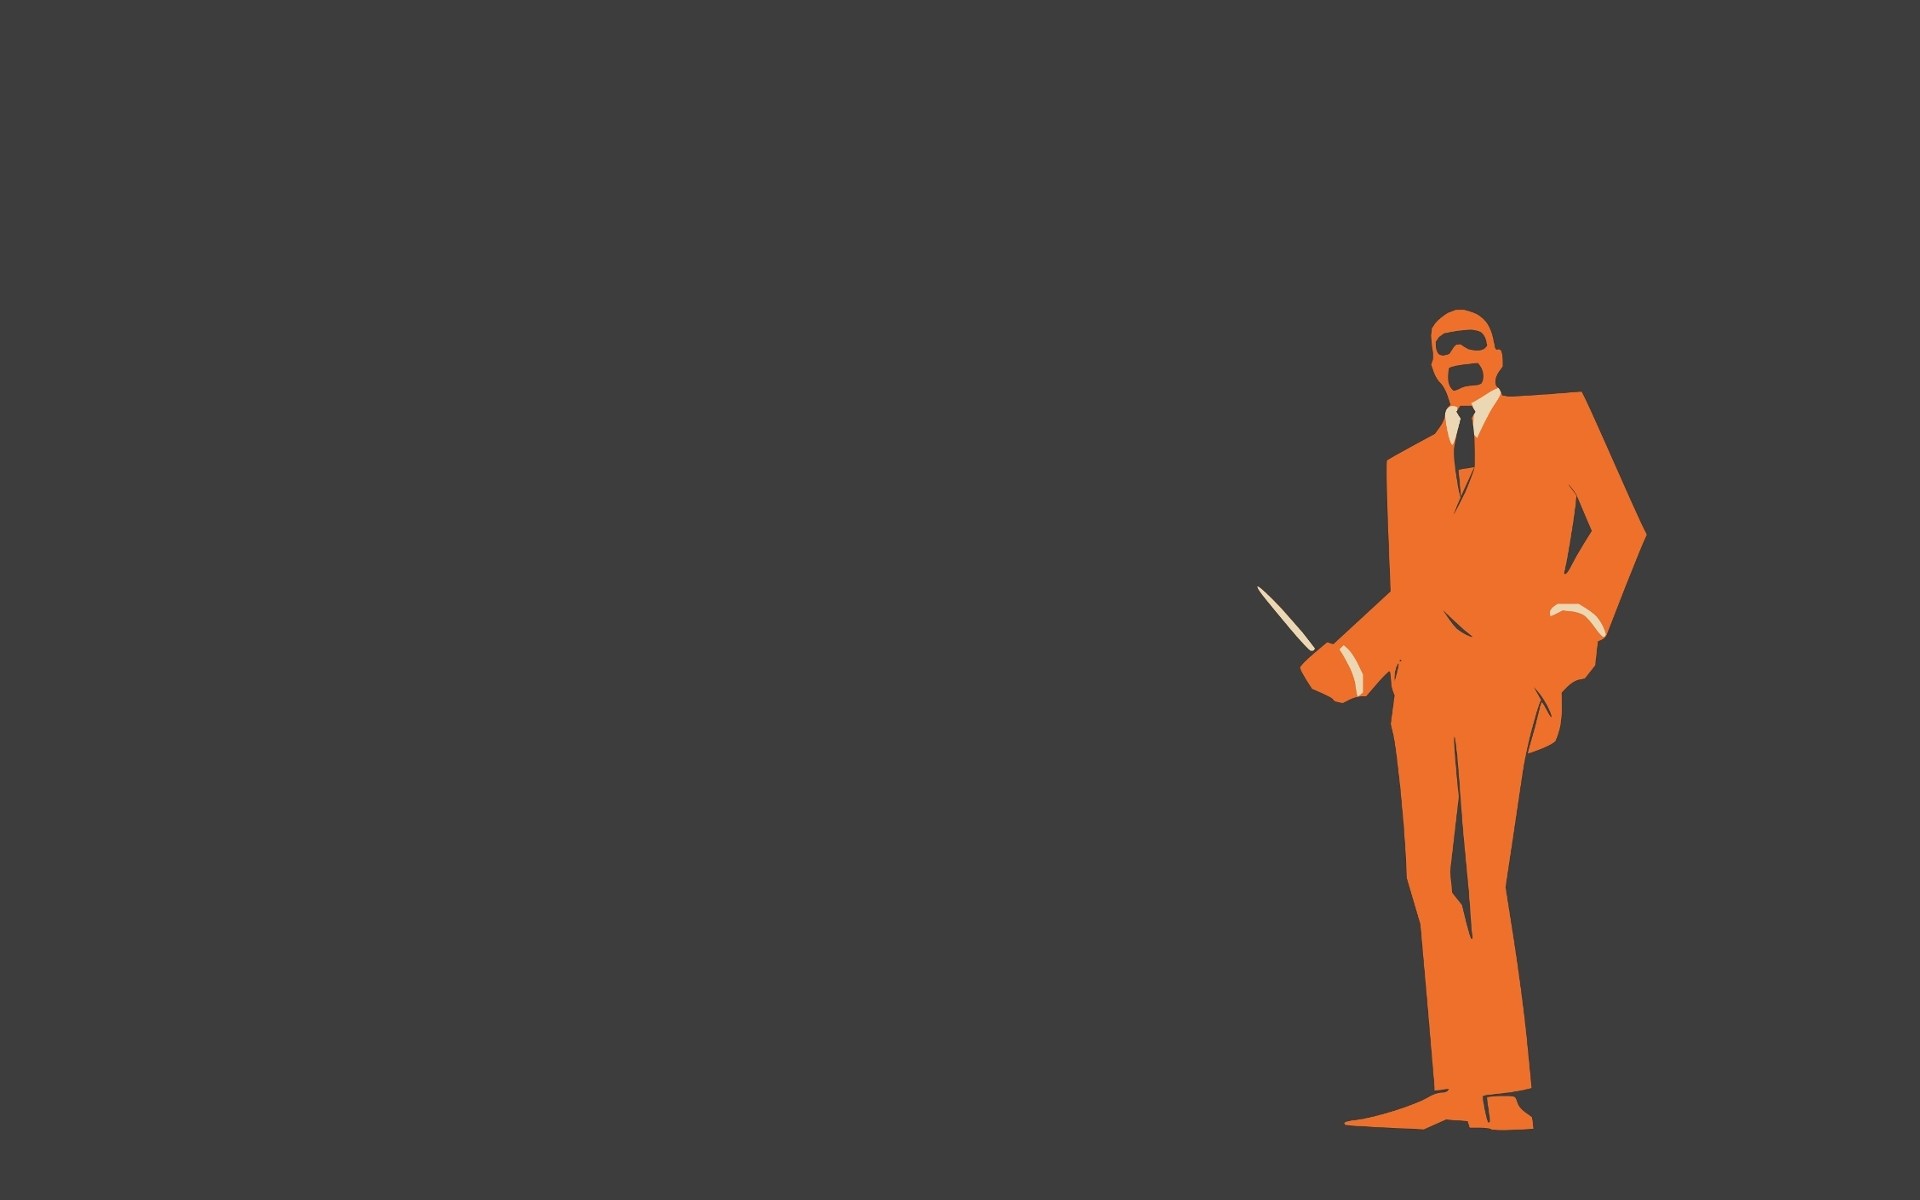 Team Fortress Spy Wallpapers Wallpaper Team Fortress 2